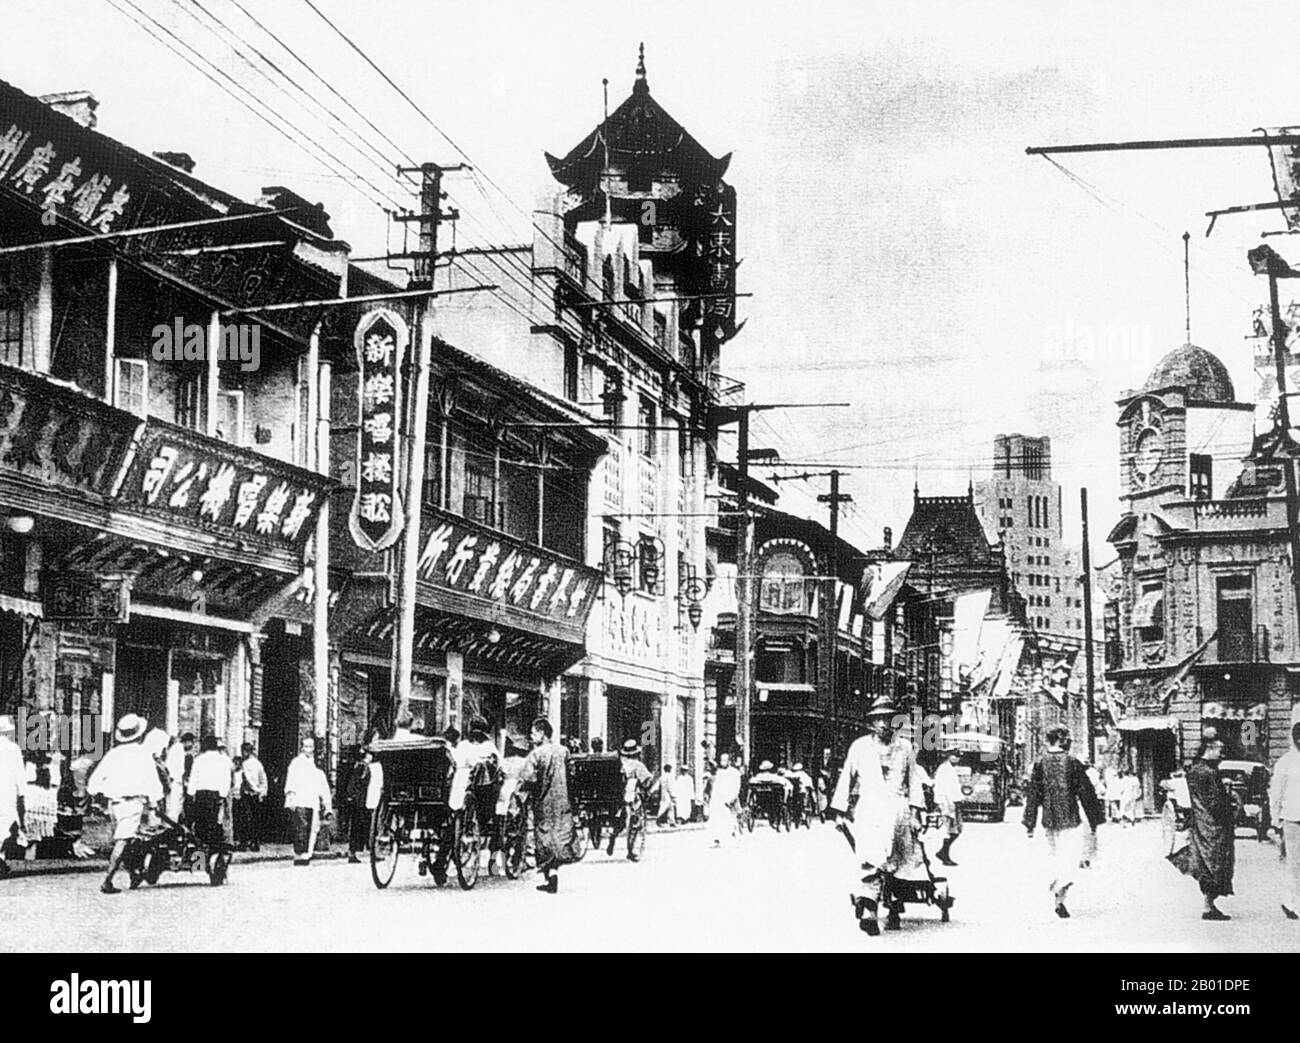 China: Shanghai's Fuzhou Road in the  French Concession, early 20th century.  The Shanghai French Concession (Chinese: 上海法租界; pinyin: Shànghǎi Fǎ Zūjiè, French: La concession française de Shanghai) was a foreign concession in Shanghai, China from 1849 until 1946, and it was progressively expanded in the late 19th and early 20th centuries.  The concession came to an end in practice in 1943 when the Vichy French government signed it over to the pro-Japanese puppet government in Nanking. Stock Photo